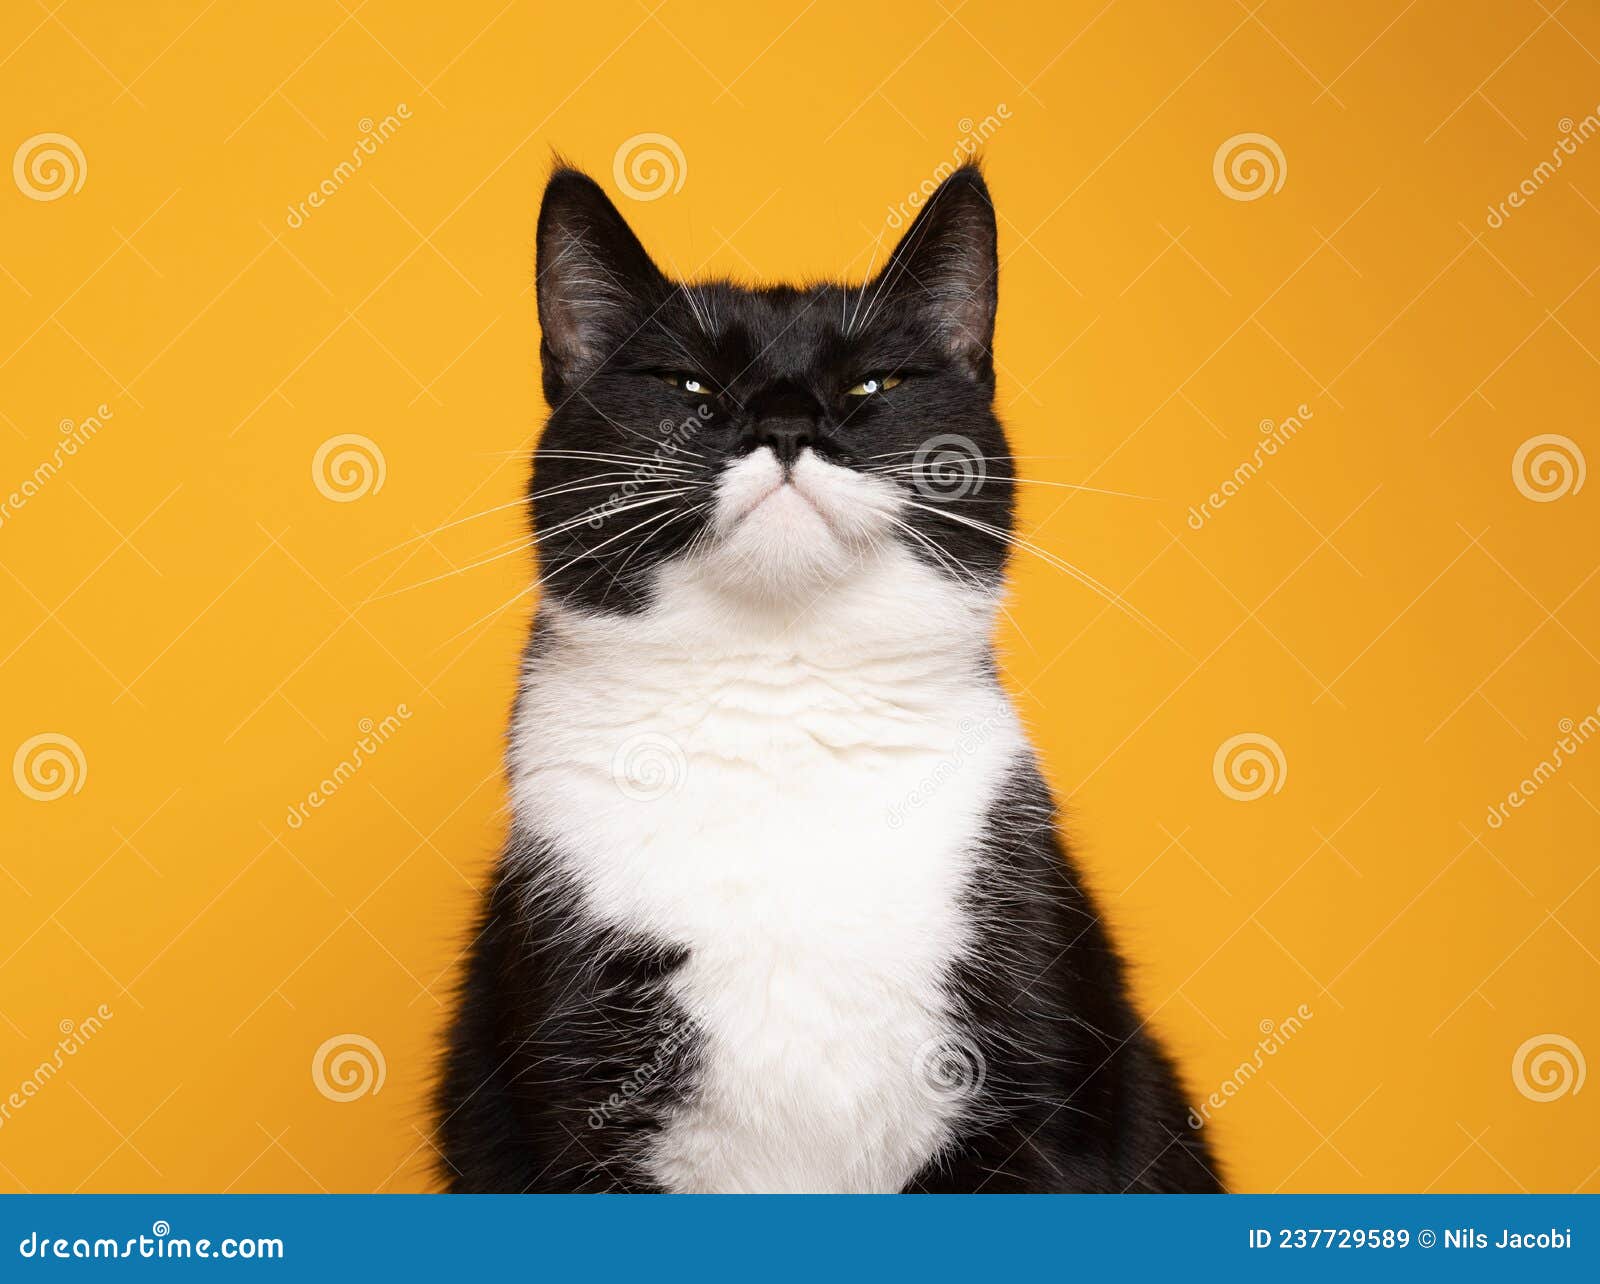 Funny Batman Cat Portrait Looking Judgy on Yellow Background Stock Image -  Image of animal, copy: 237729589